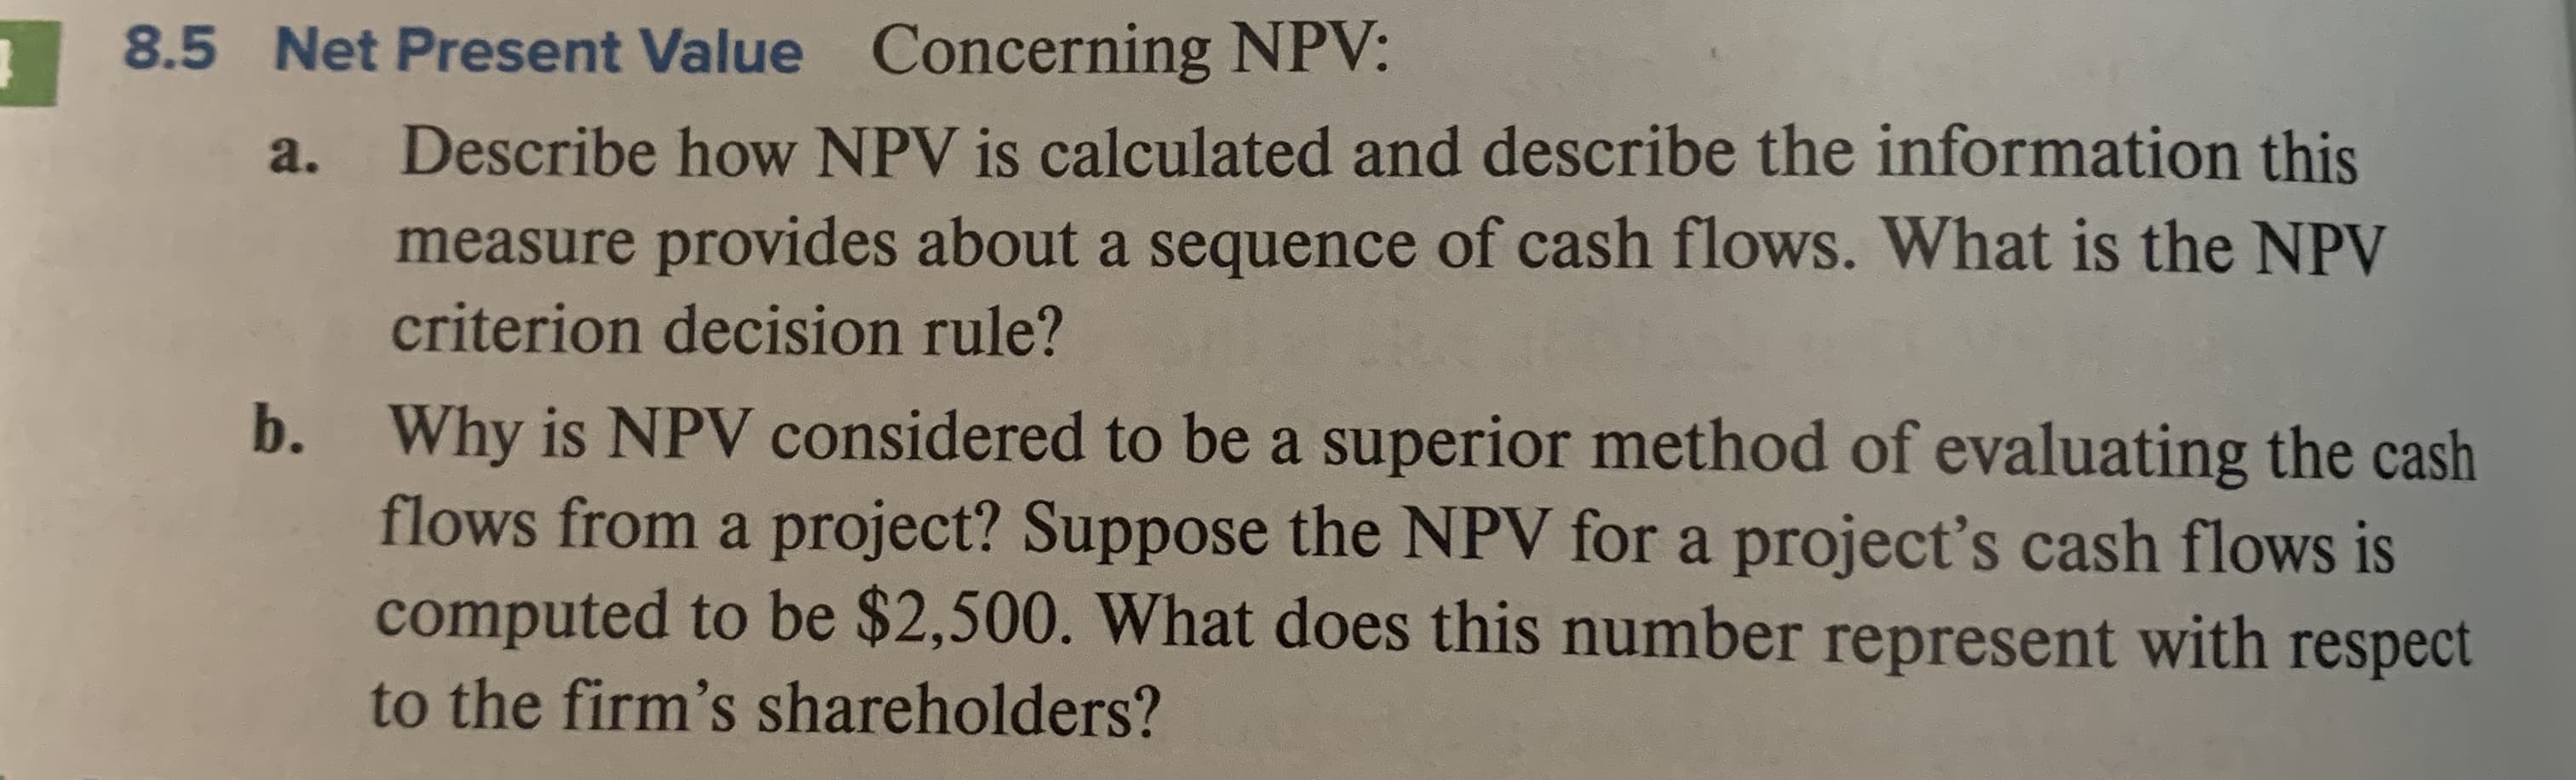 Concerning NPV:
8.5 Net Present Value
Describe how NPV is calculated and describe the information this
a.
measure provides about a sequence of cash flows. What is the NPV
criterion decision rule?
Why is NPV considered to be a superior method of evaluating the cash
flows from a project? Suppose the NPV fora project's cash flows is
computed to be $2,500. What does this number represent with respect
b.
to the firm's shareholders?
